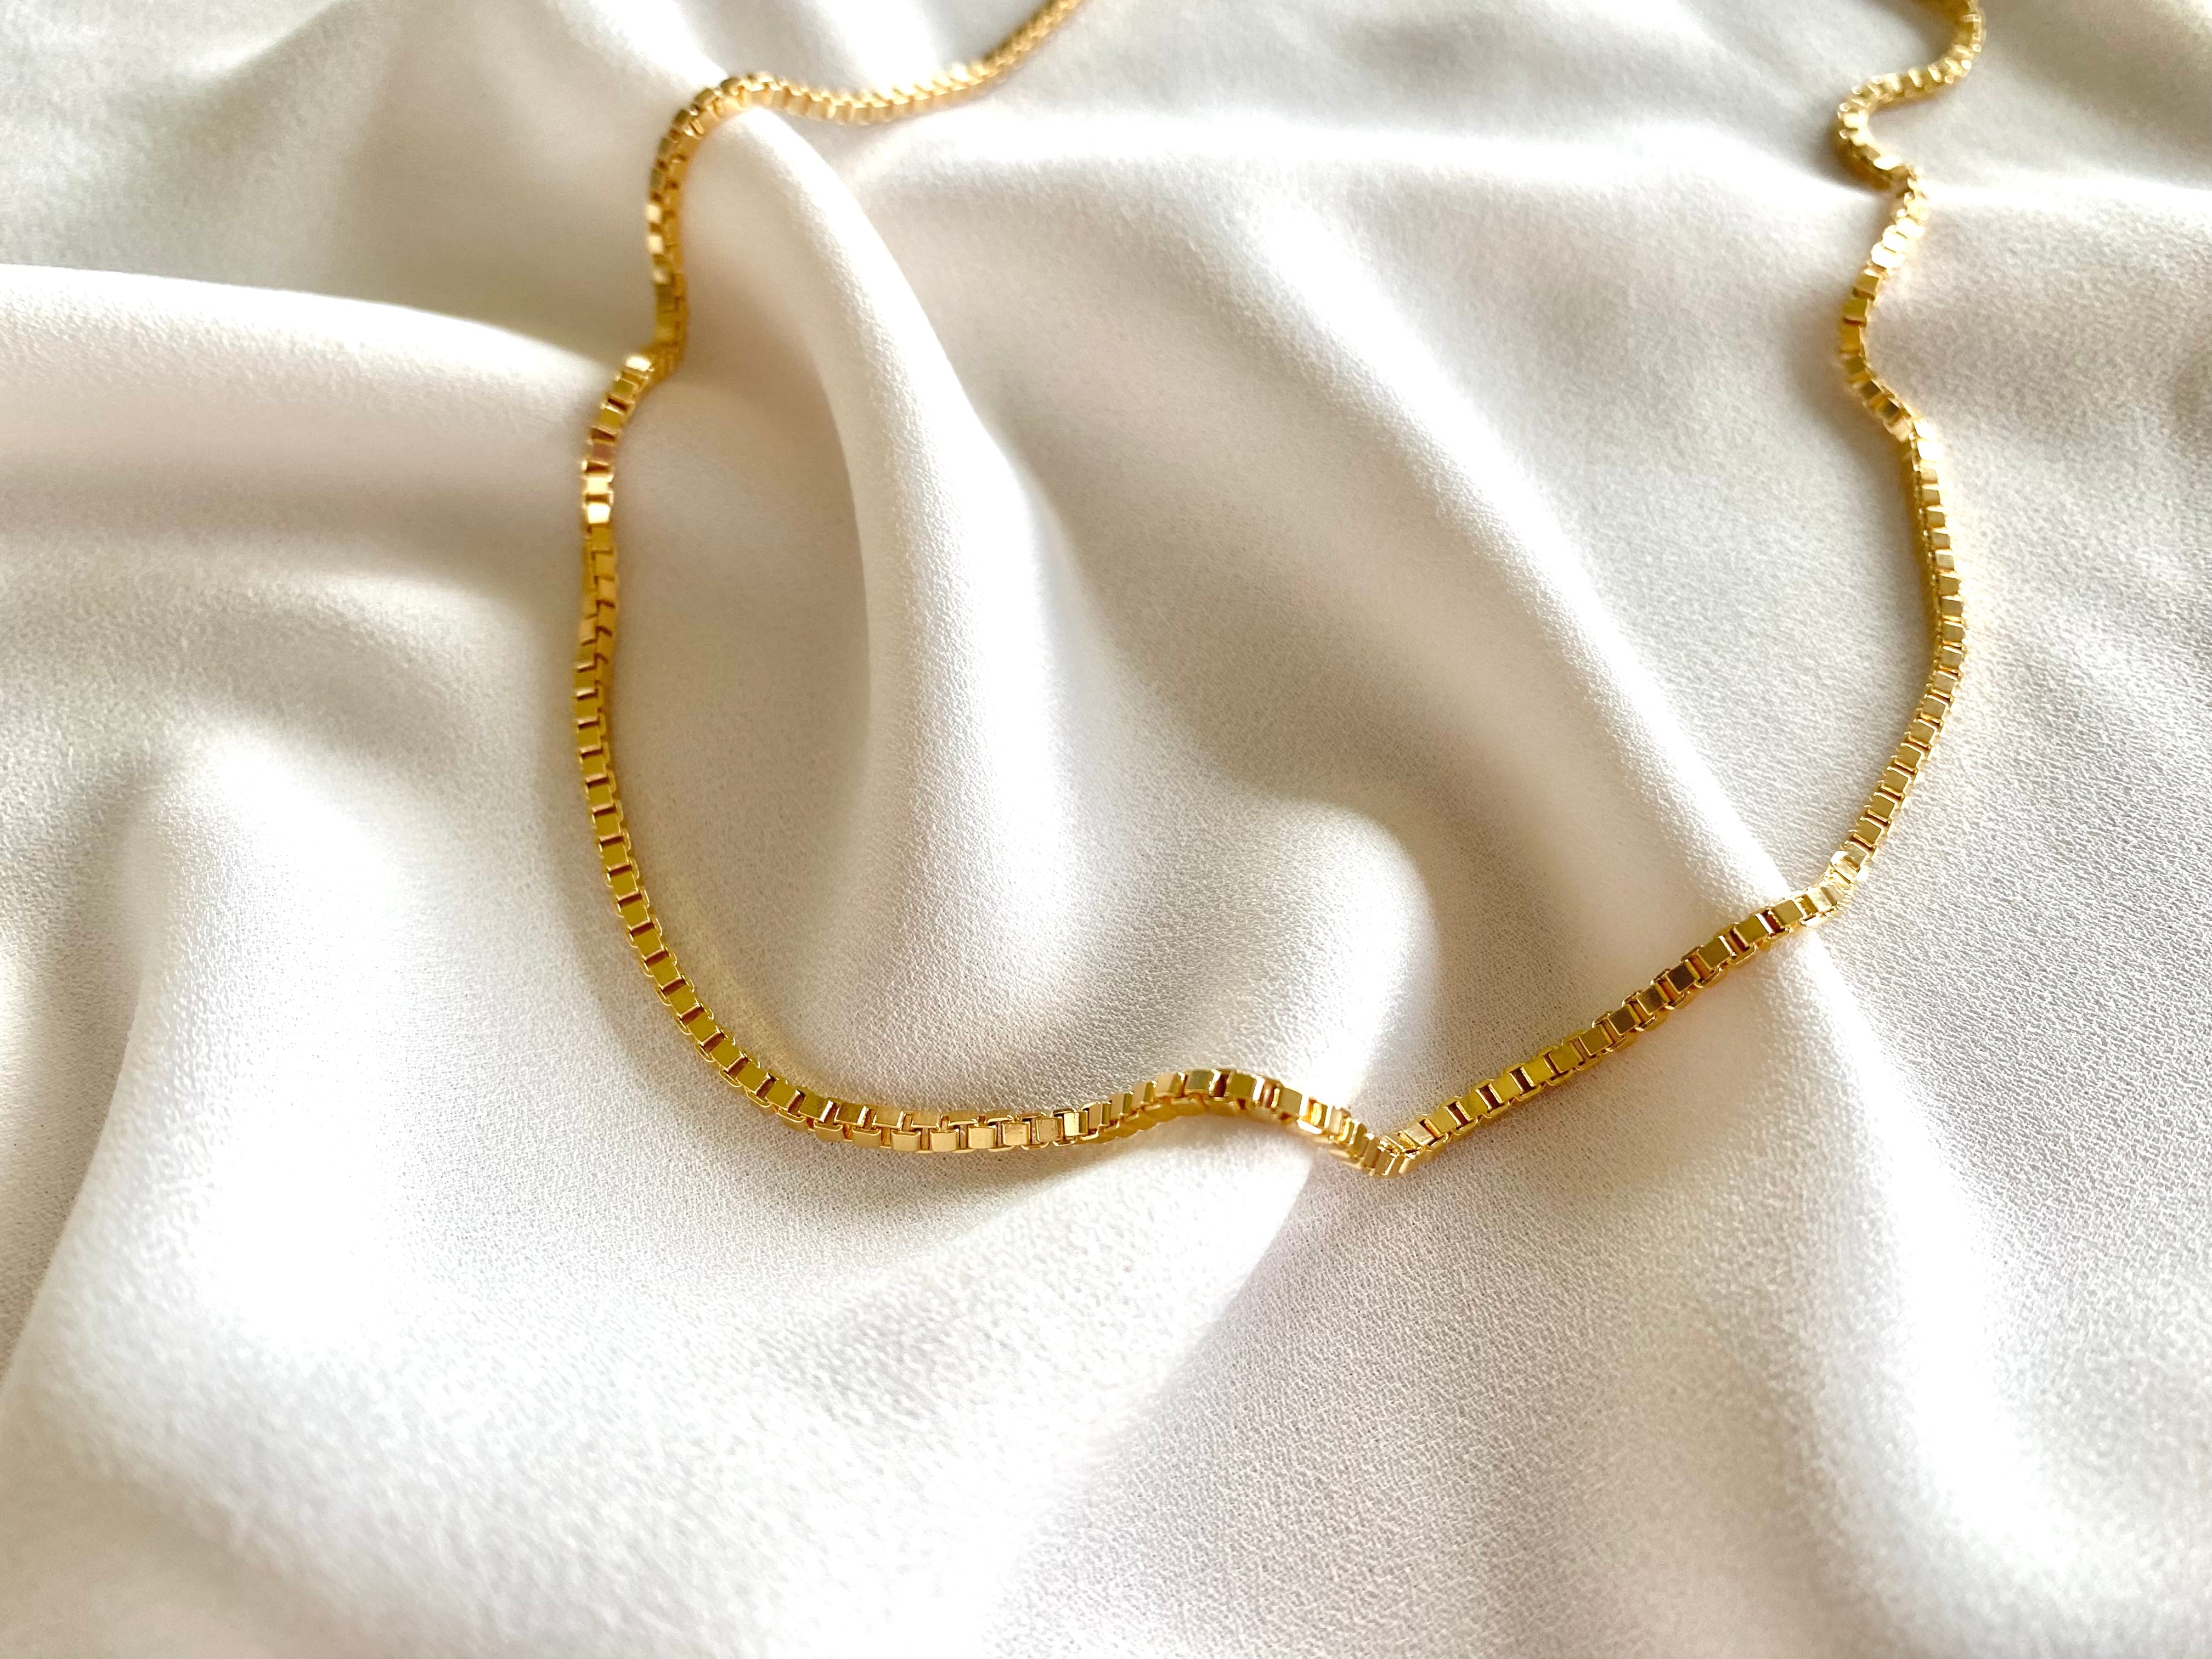 Thick Gold Filled Box Chain Necklace Layering Chains for Women Simple Minimalist Chains Wide Box Stacking Necklaces 16 to 24 inch Gift Idea